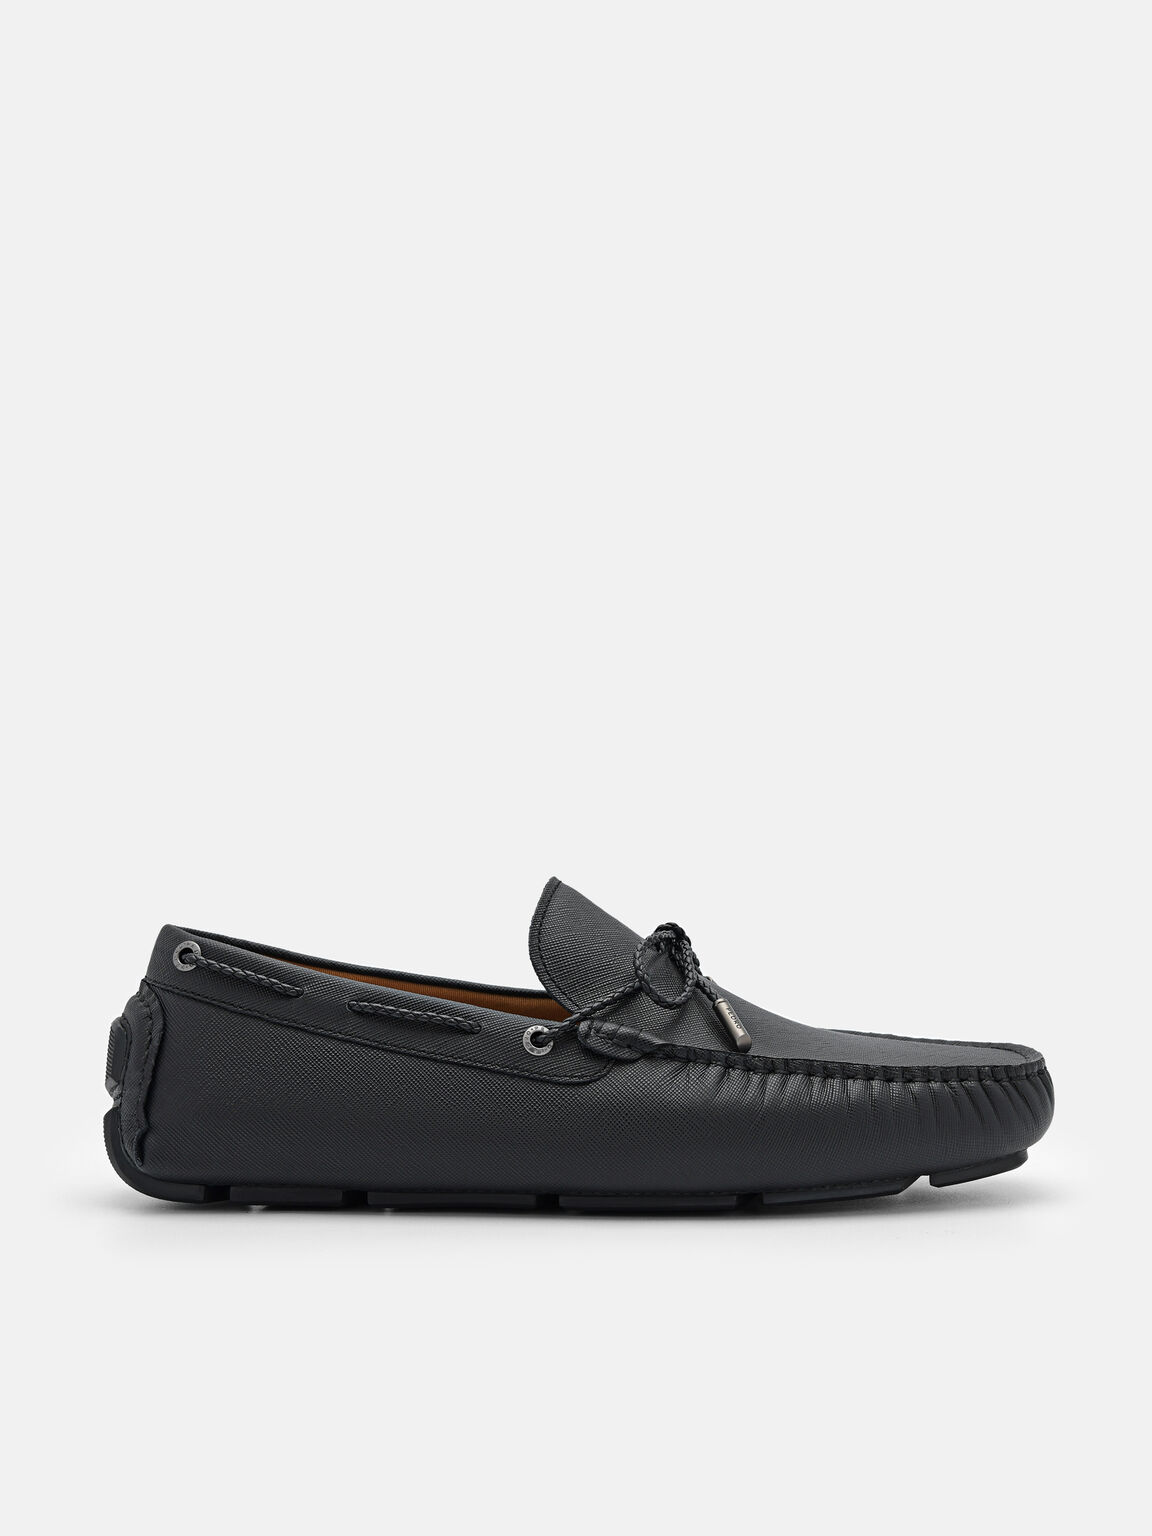 Black Leather Bow Moccasins - PEDRO SG